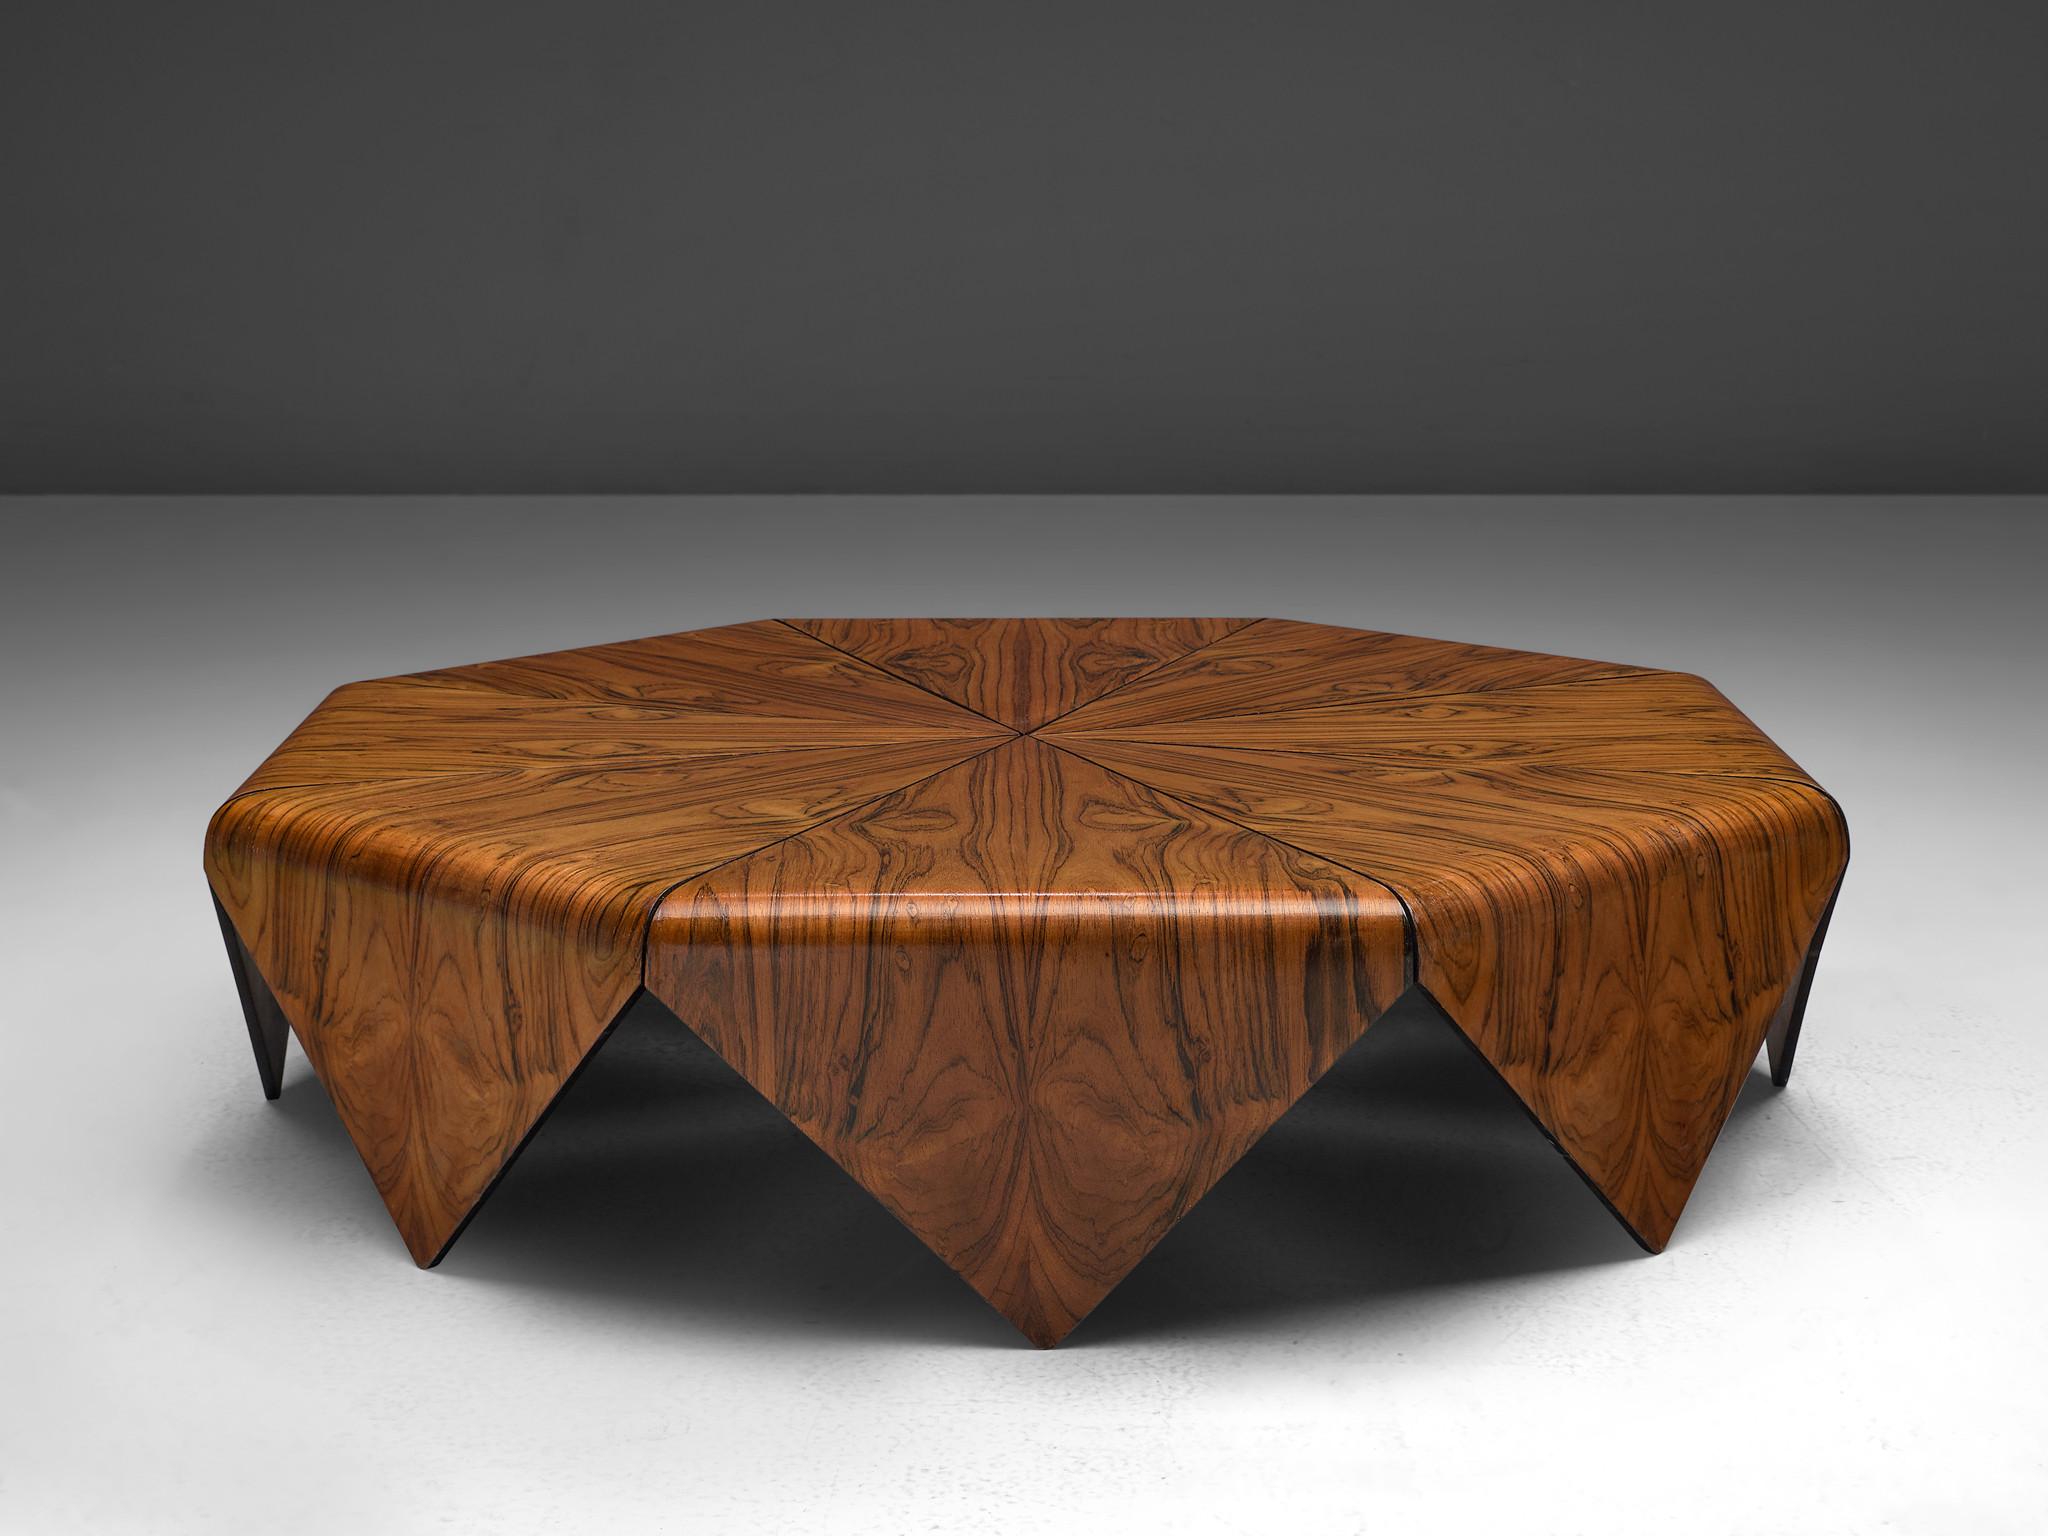 Jorge Zalszupin for L'Atelier, coffee table, Jacaranda rosewood, Brazil, 1960s. 

The 'Pétalas' coffee table is a design by Jorge Zalszupin, inspired by a folded paper structure of origami. The rosewood coffee table consists of eight